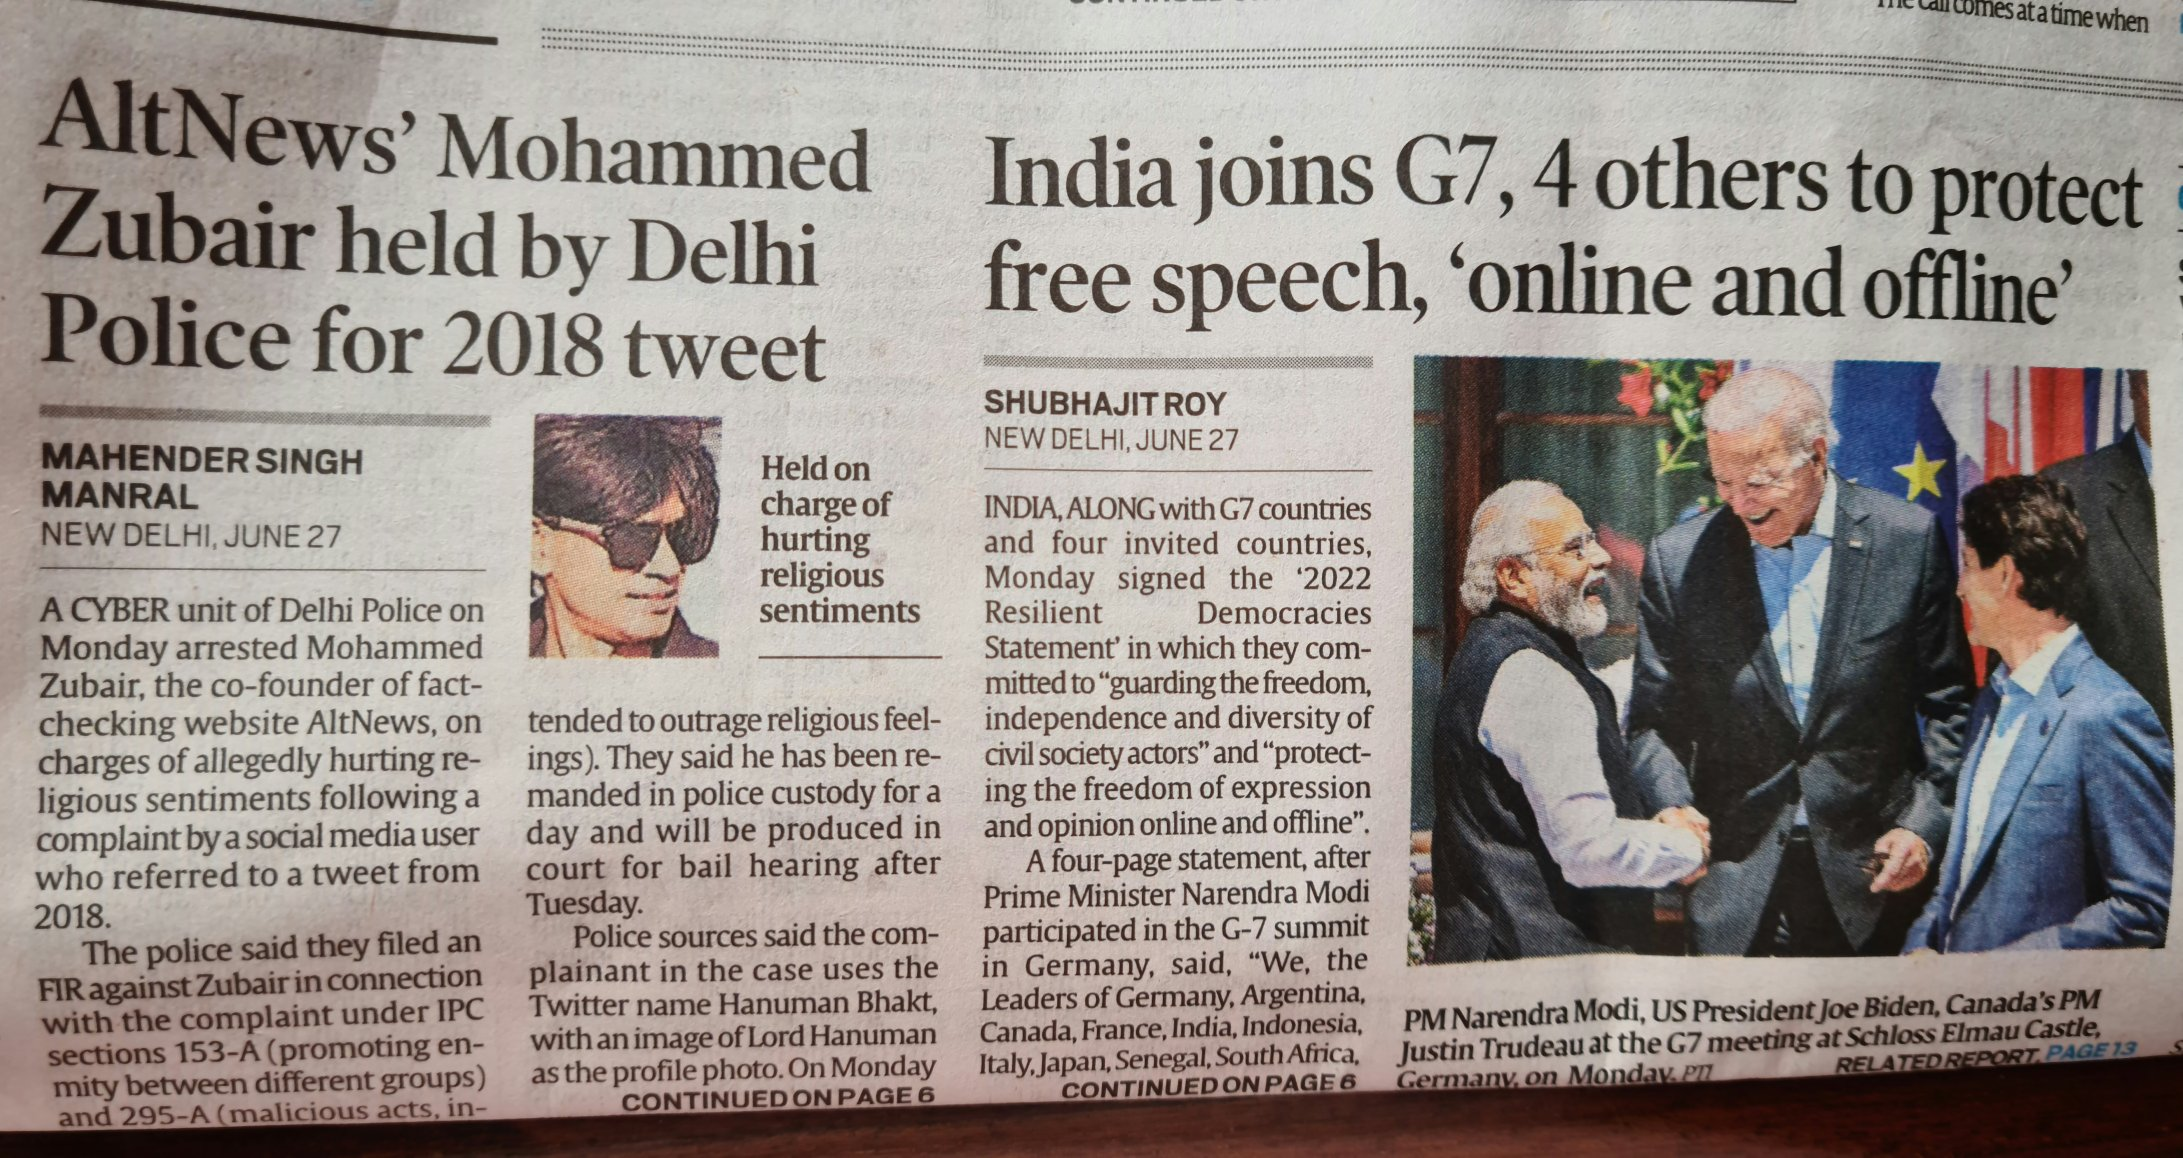 India joins G7 in "free speech" campaign